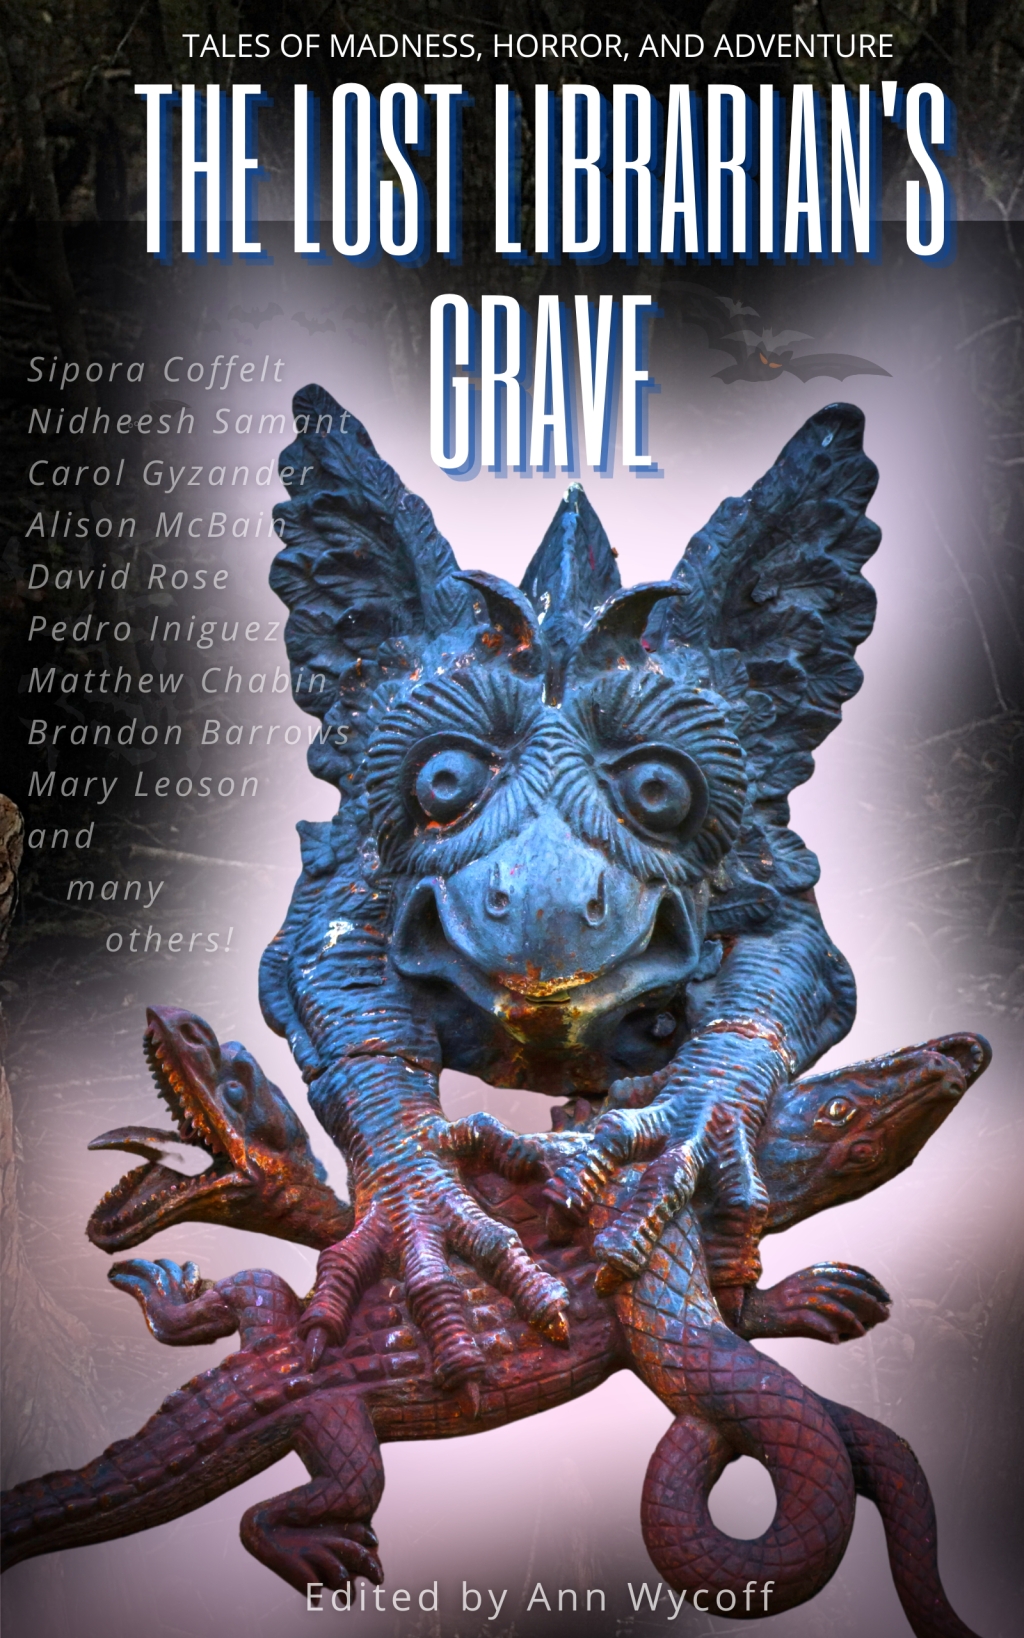 The Lost Librarian’s Grave: Table of Contents Reveal